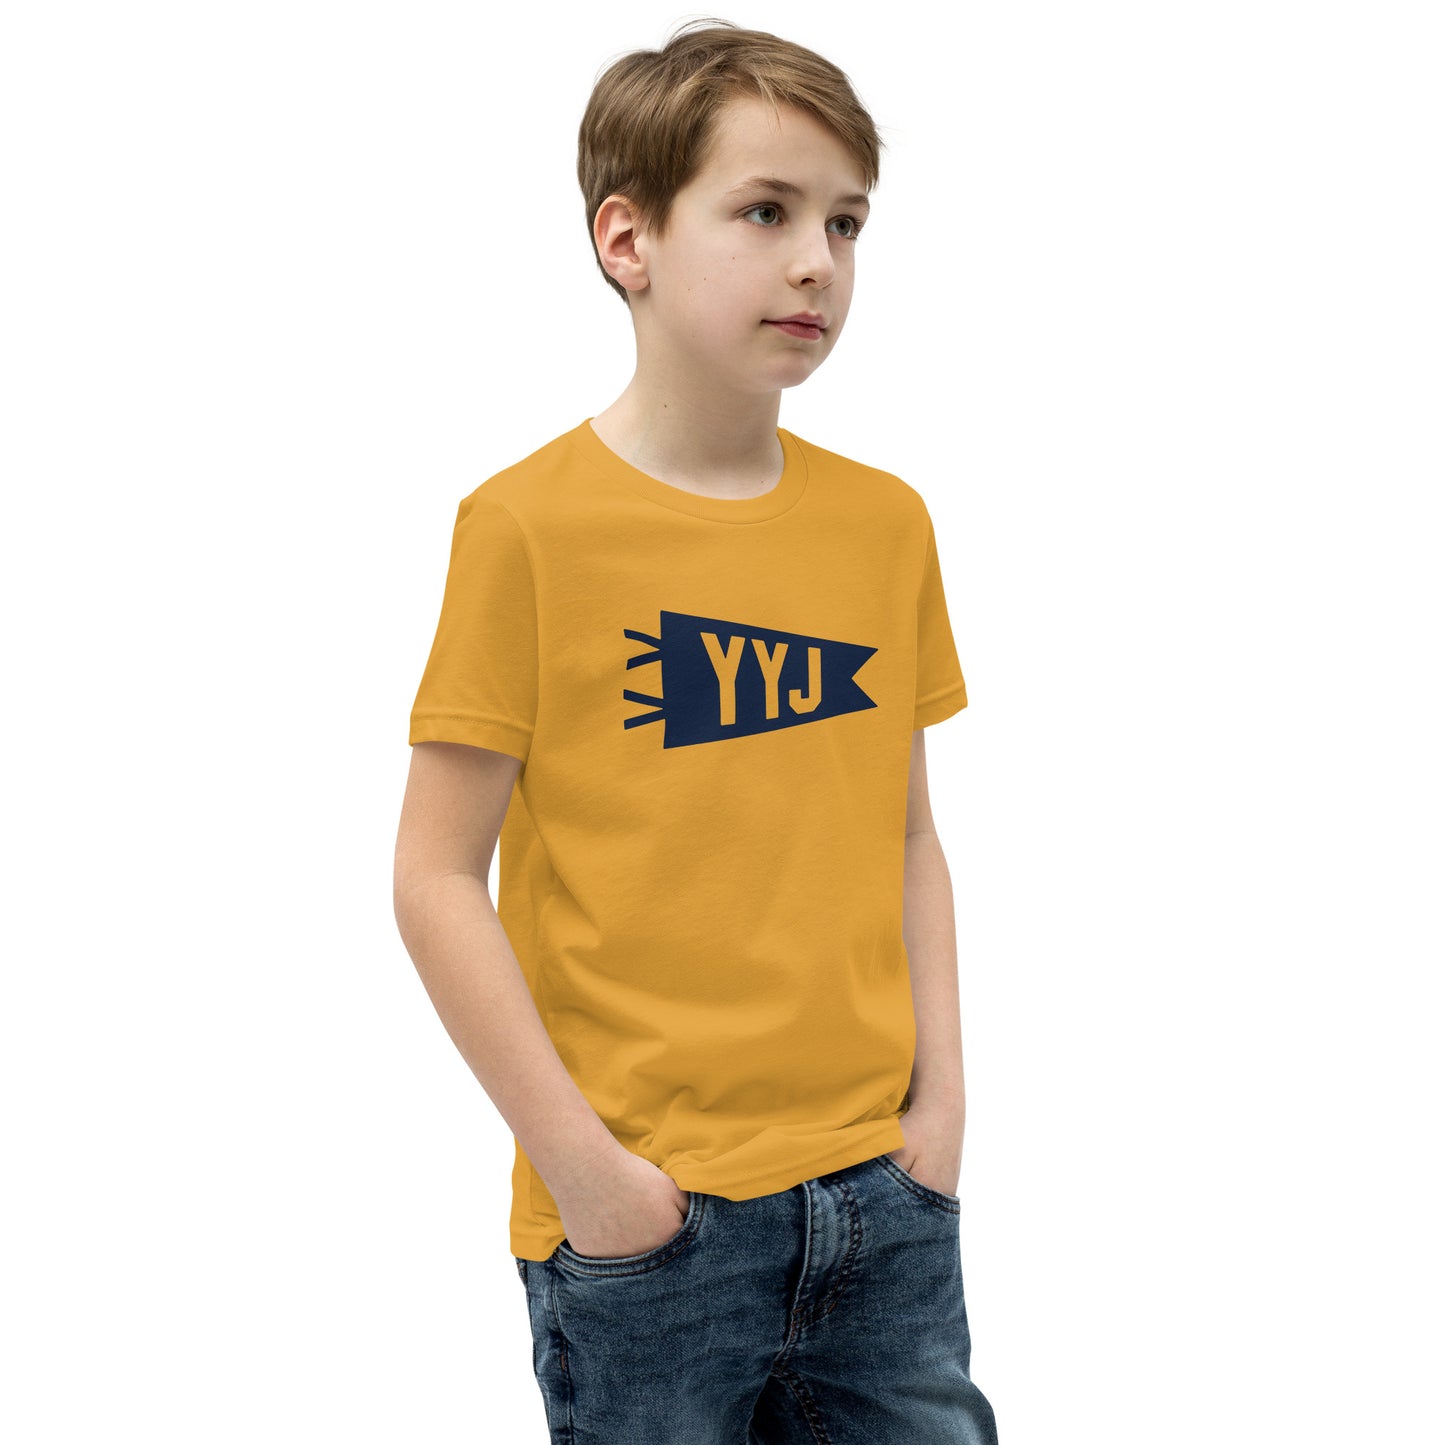 Kid's Airport Code Tee - Navy Blue Graphic • YYJ Victoria • YHM Designs - Image 07